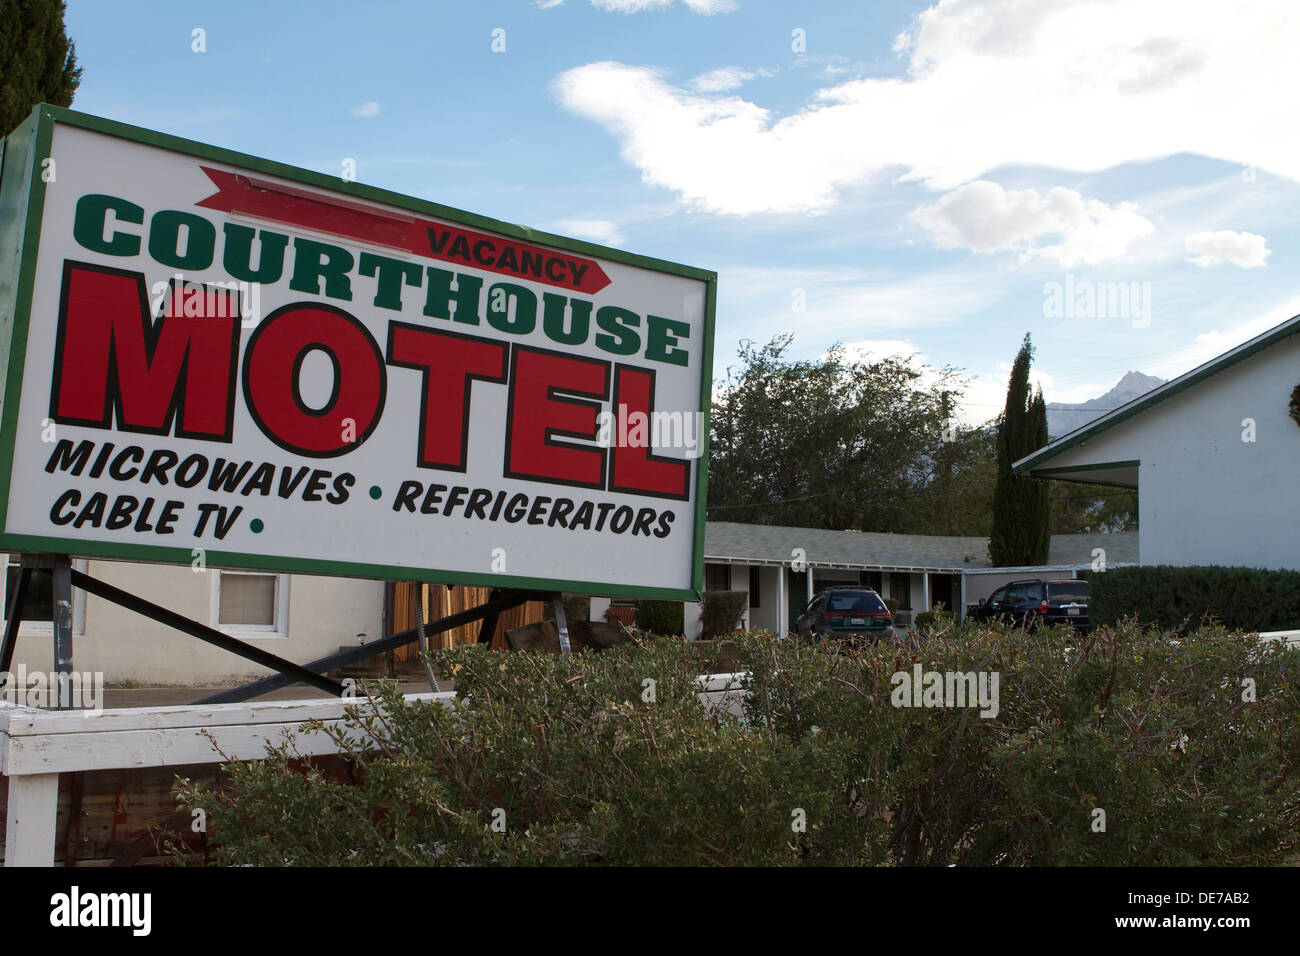 Courthouse Motel  in the historic  town of Independence on the US highway 395 in Inyo county California part of the Owens Valley Stock Photo